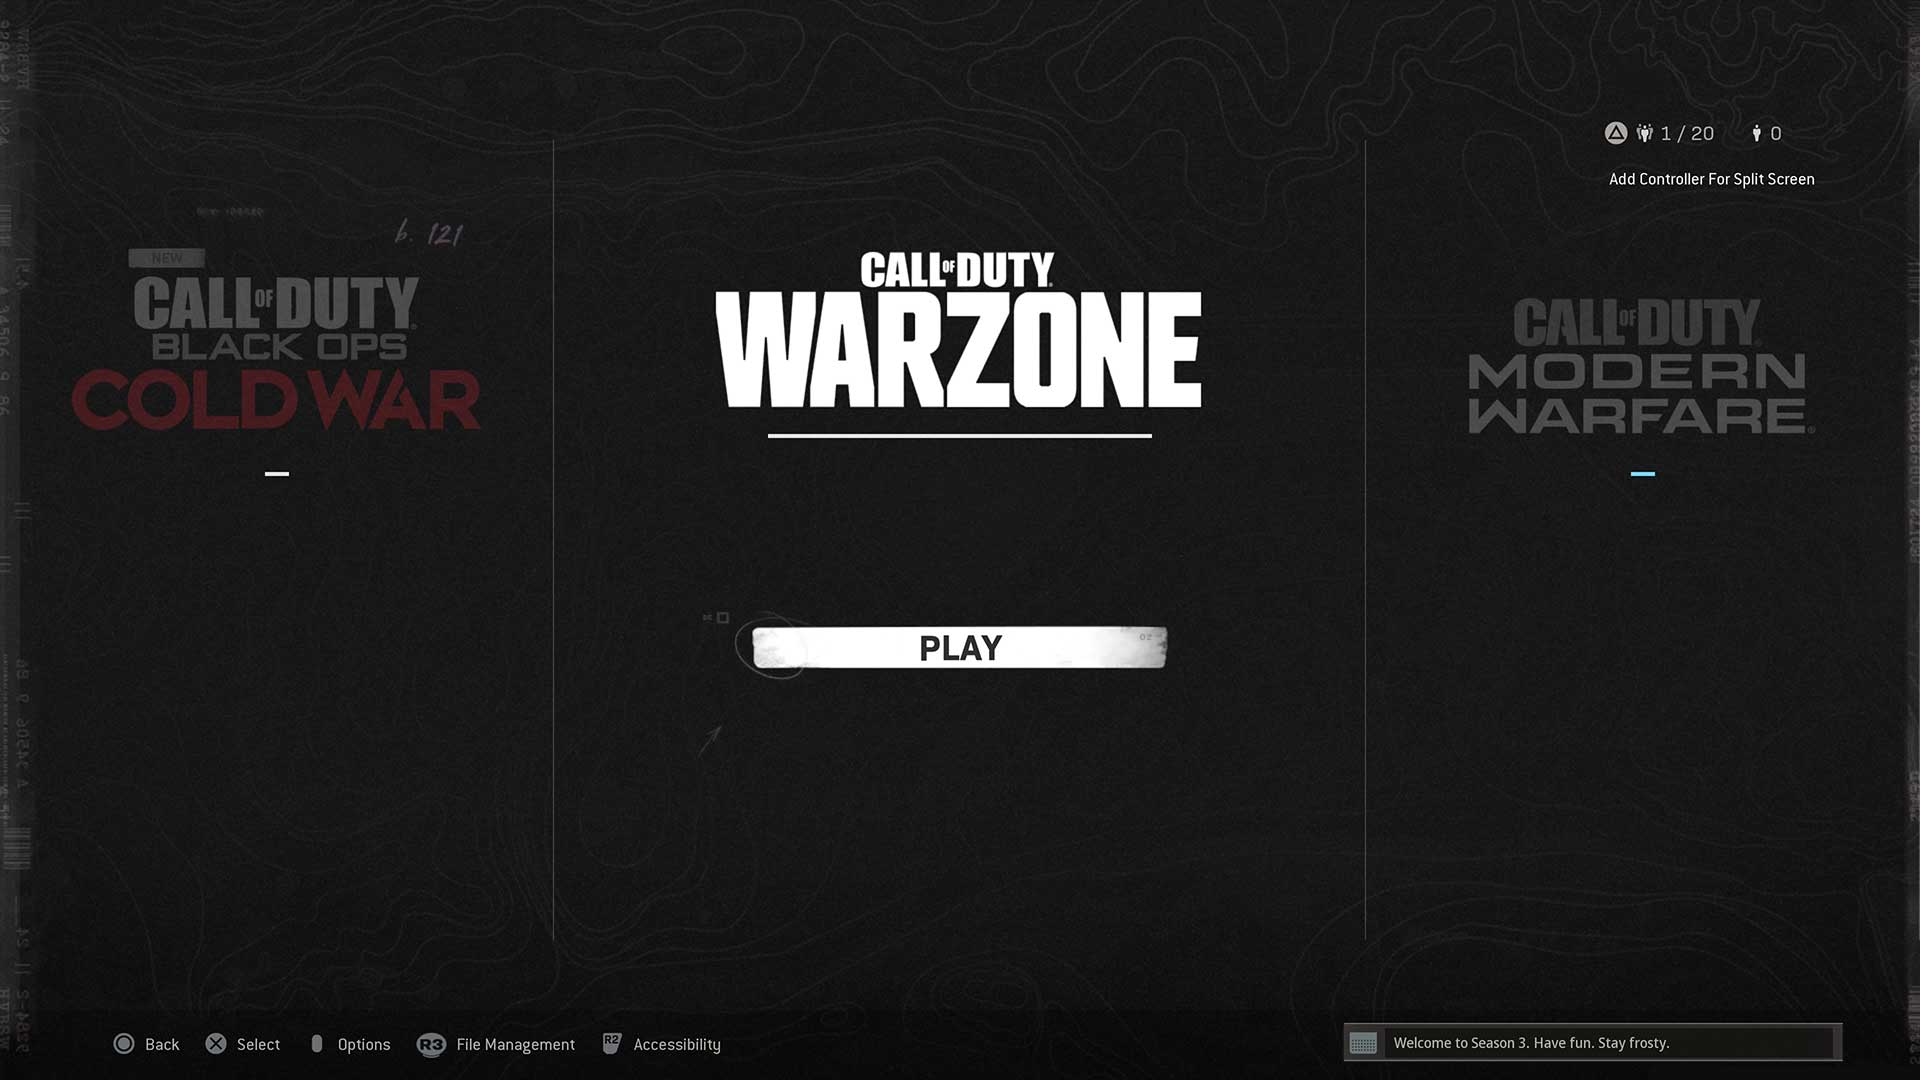 Does Call of Duty Vanguard Support Split-screen Play?